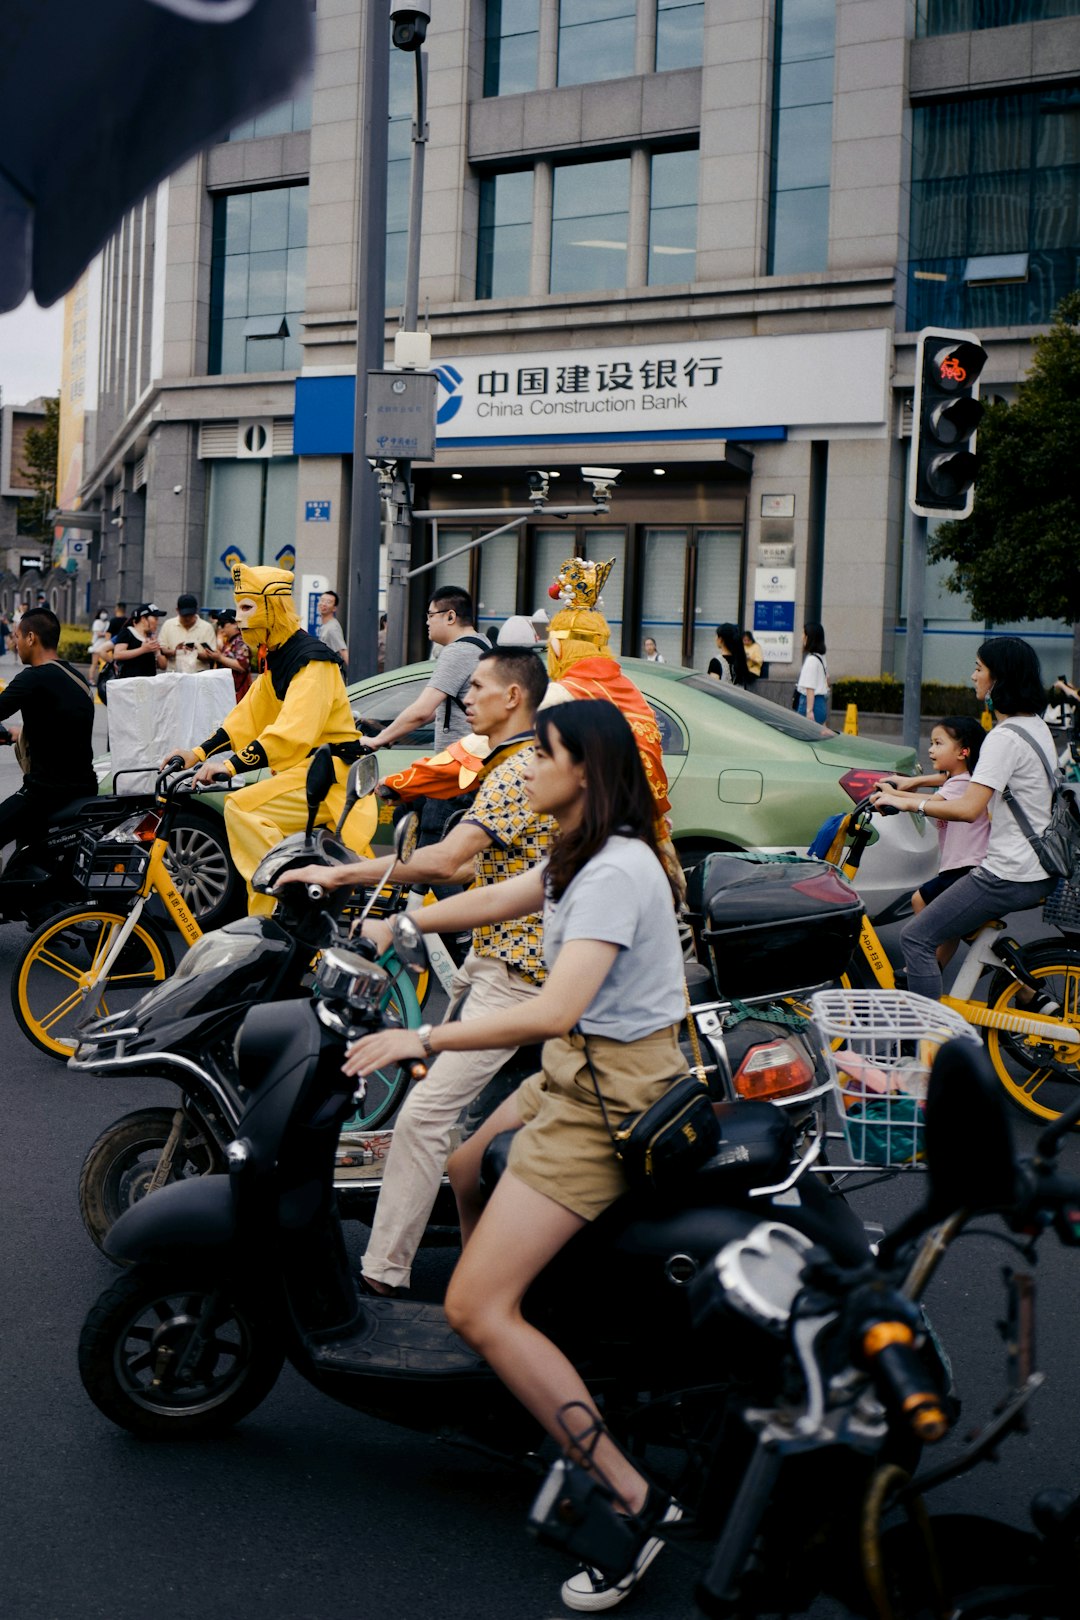 people riding motorcycle on road during daytime